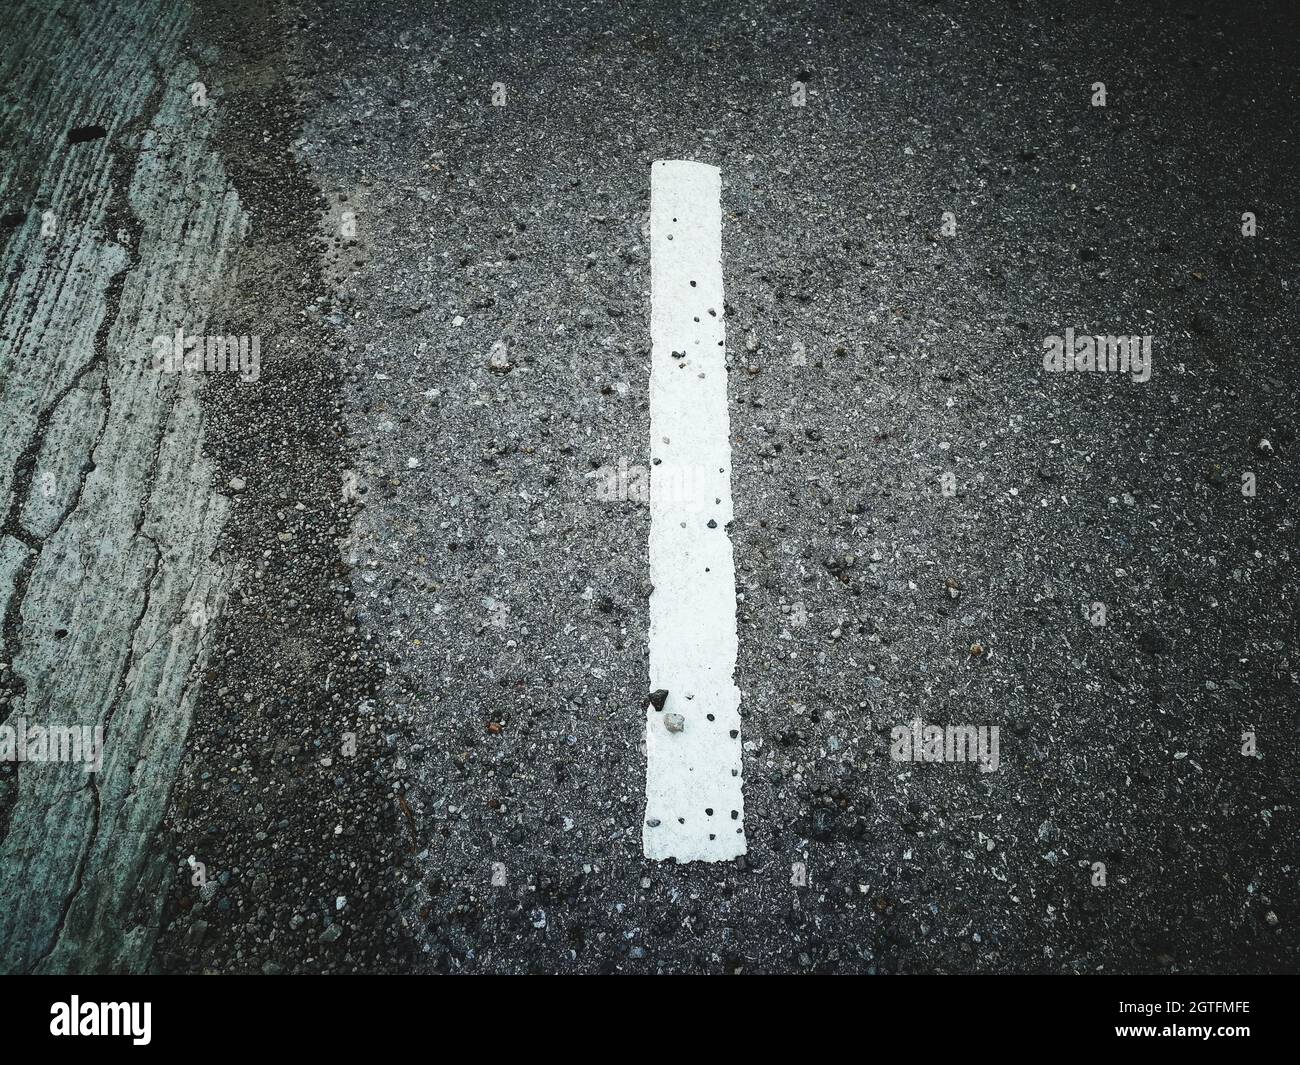 High Angle View Of Road Marking On Street Stock Photo